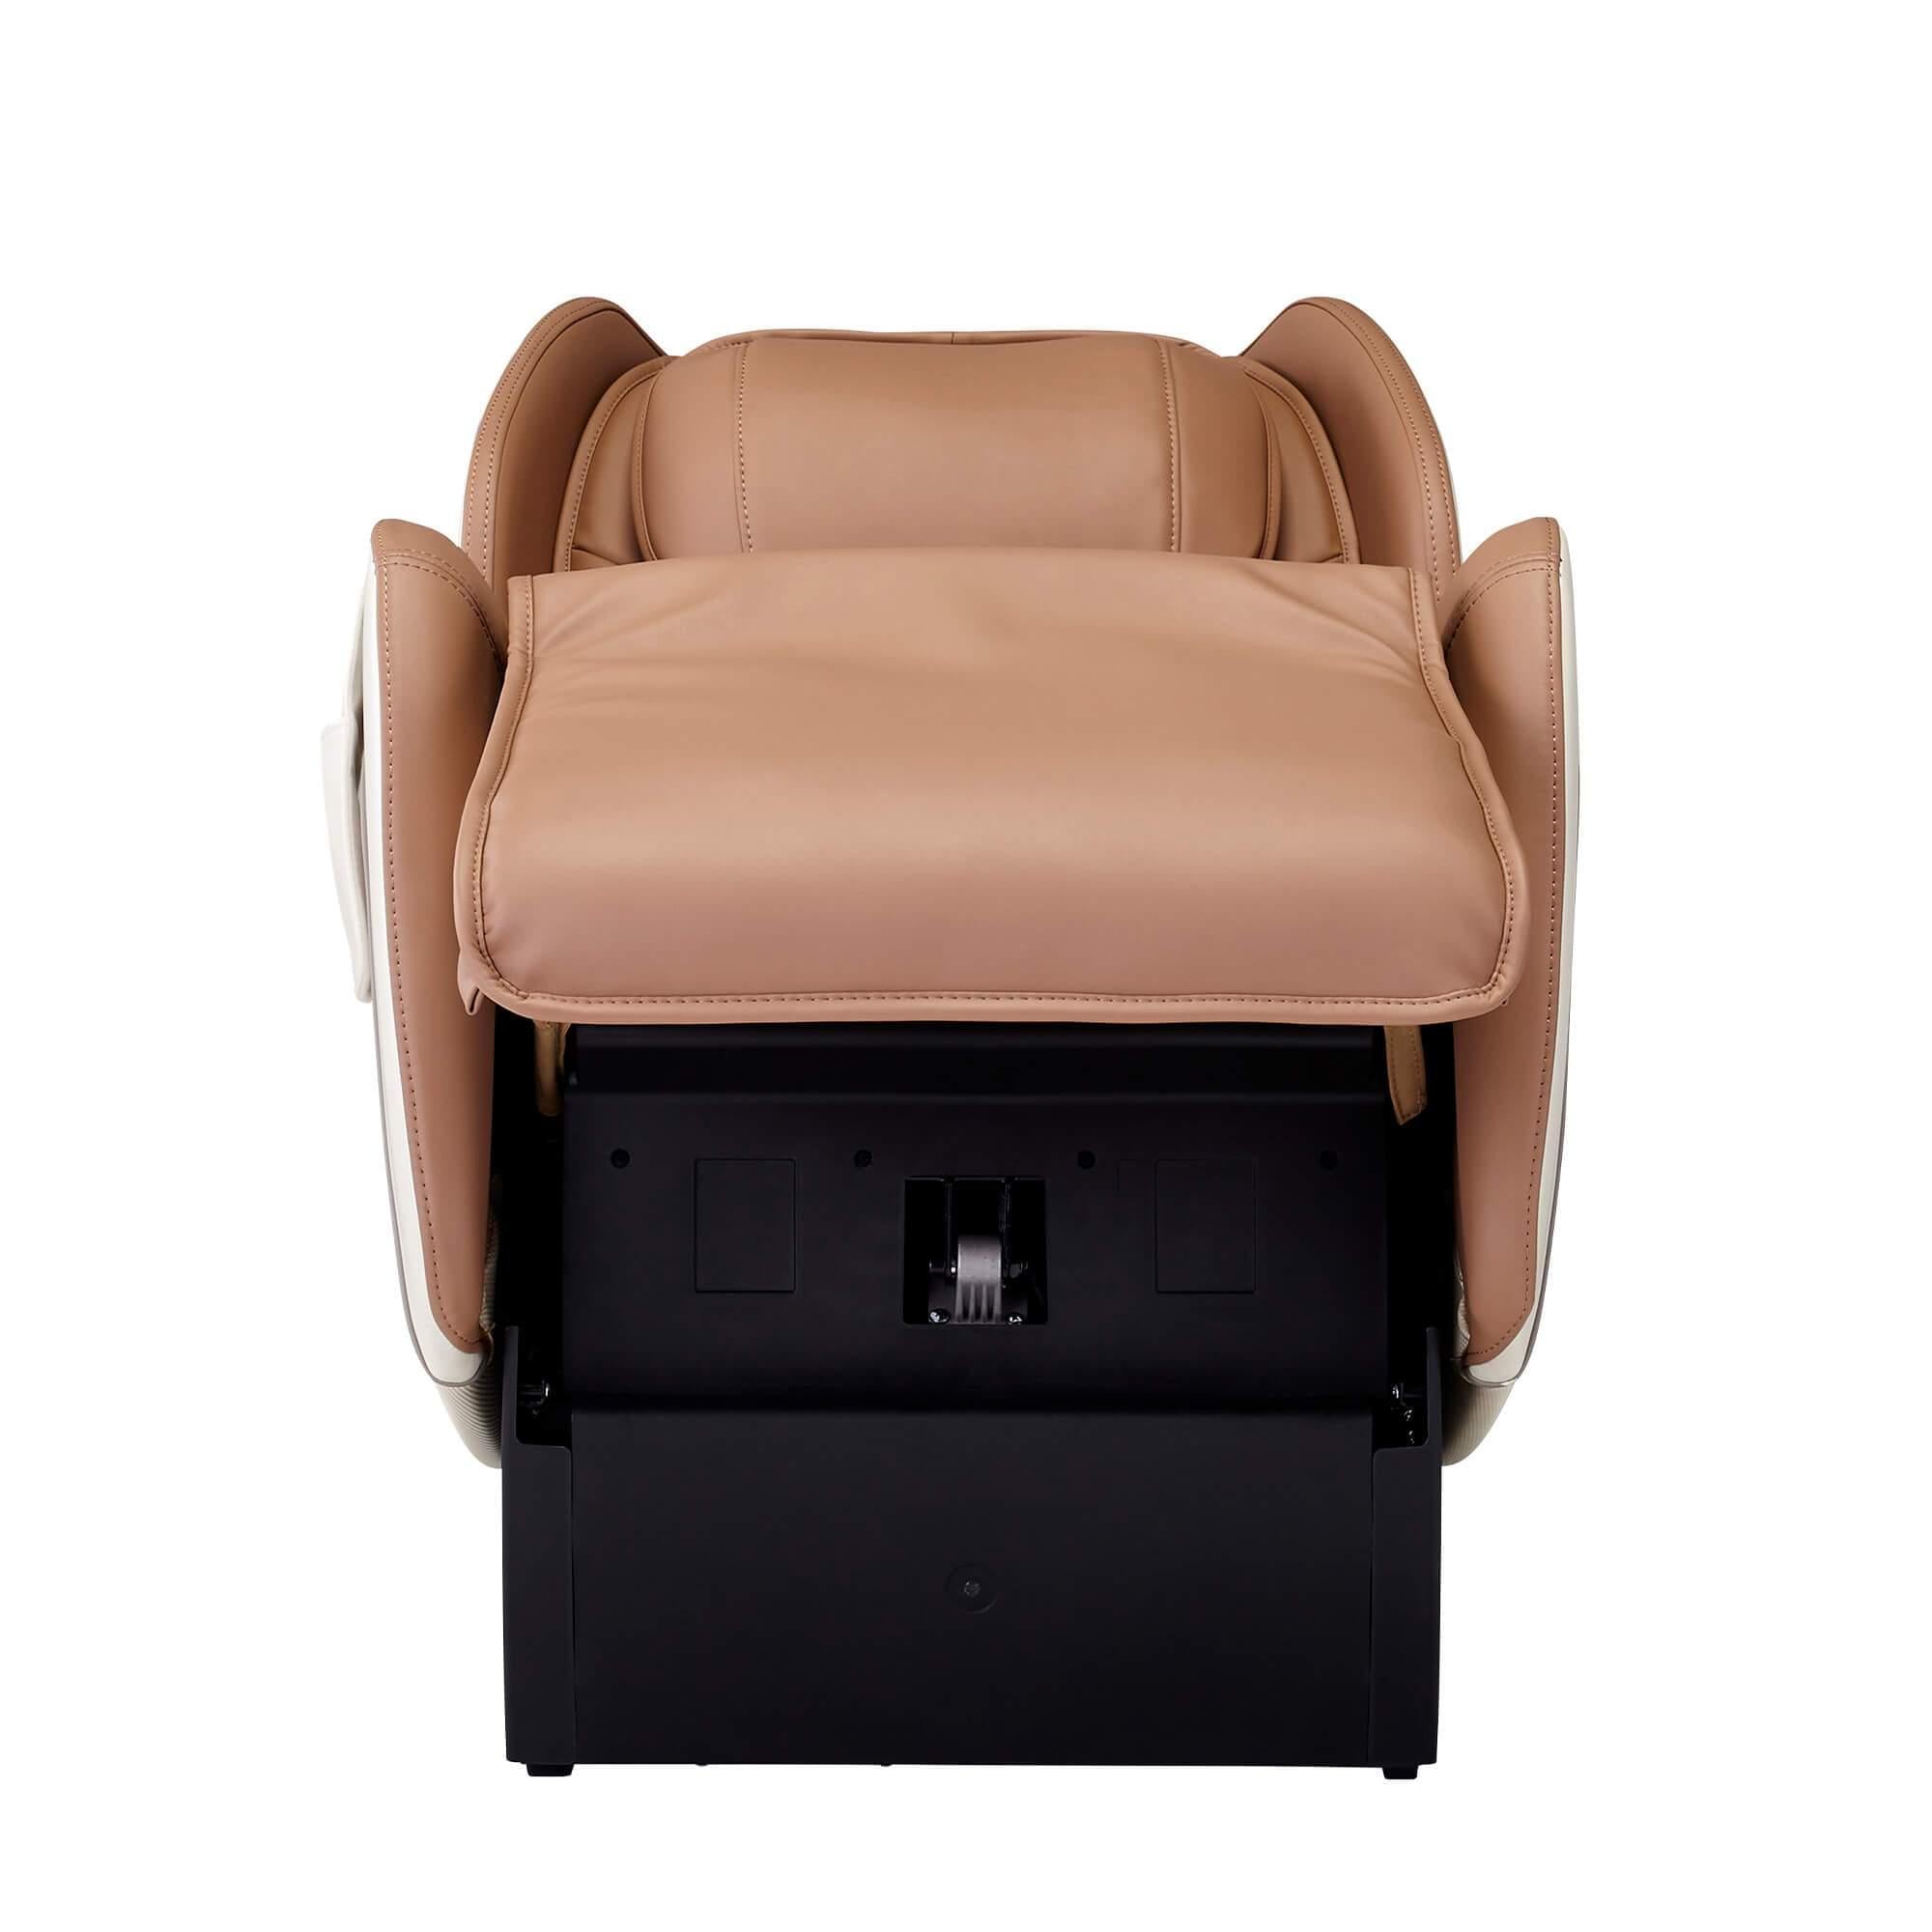 Massage Unmatched CirC - and ZEBRA CHAIRS – Synca Style MASSAGE Comfort Plus Chair